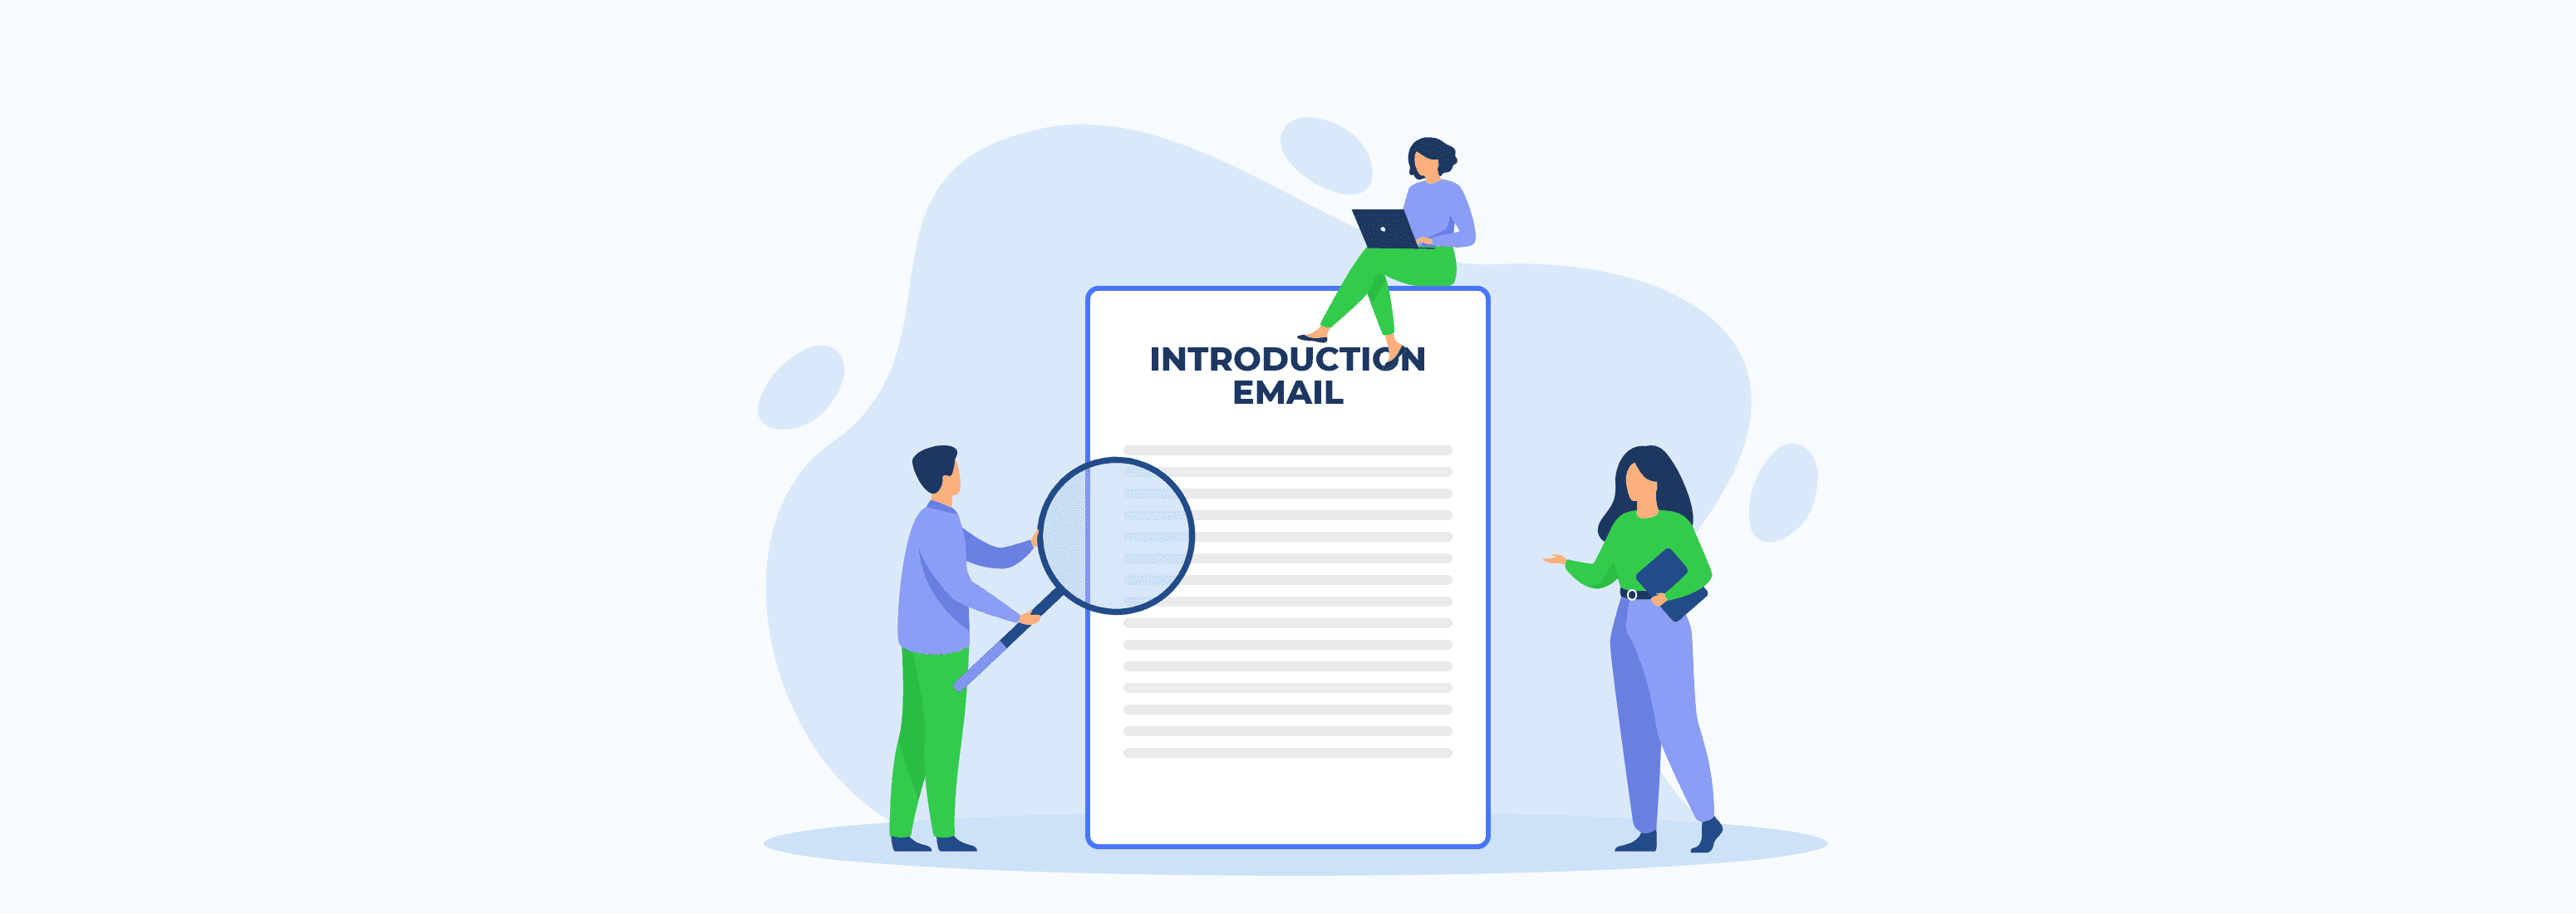 How_to_write_an_introduction_email___Stripo